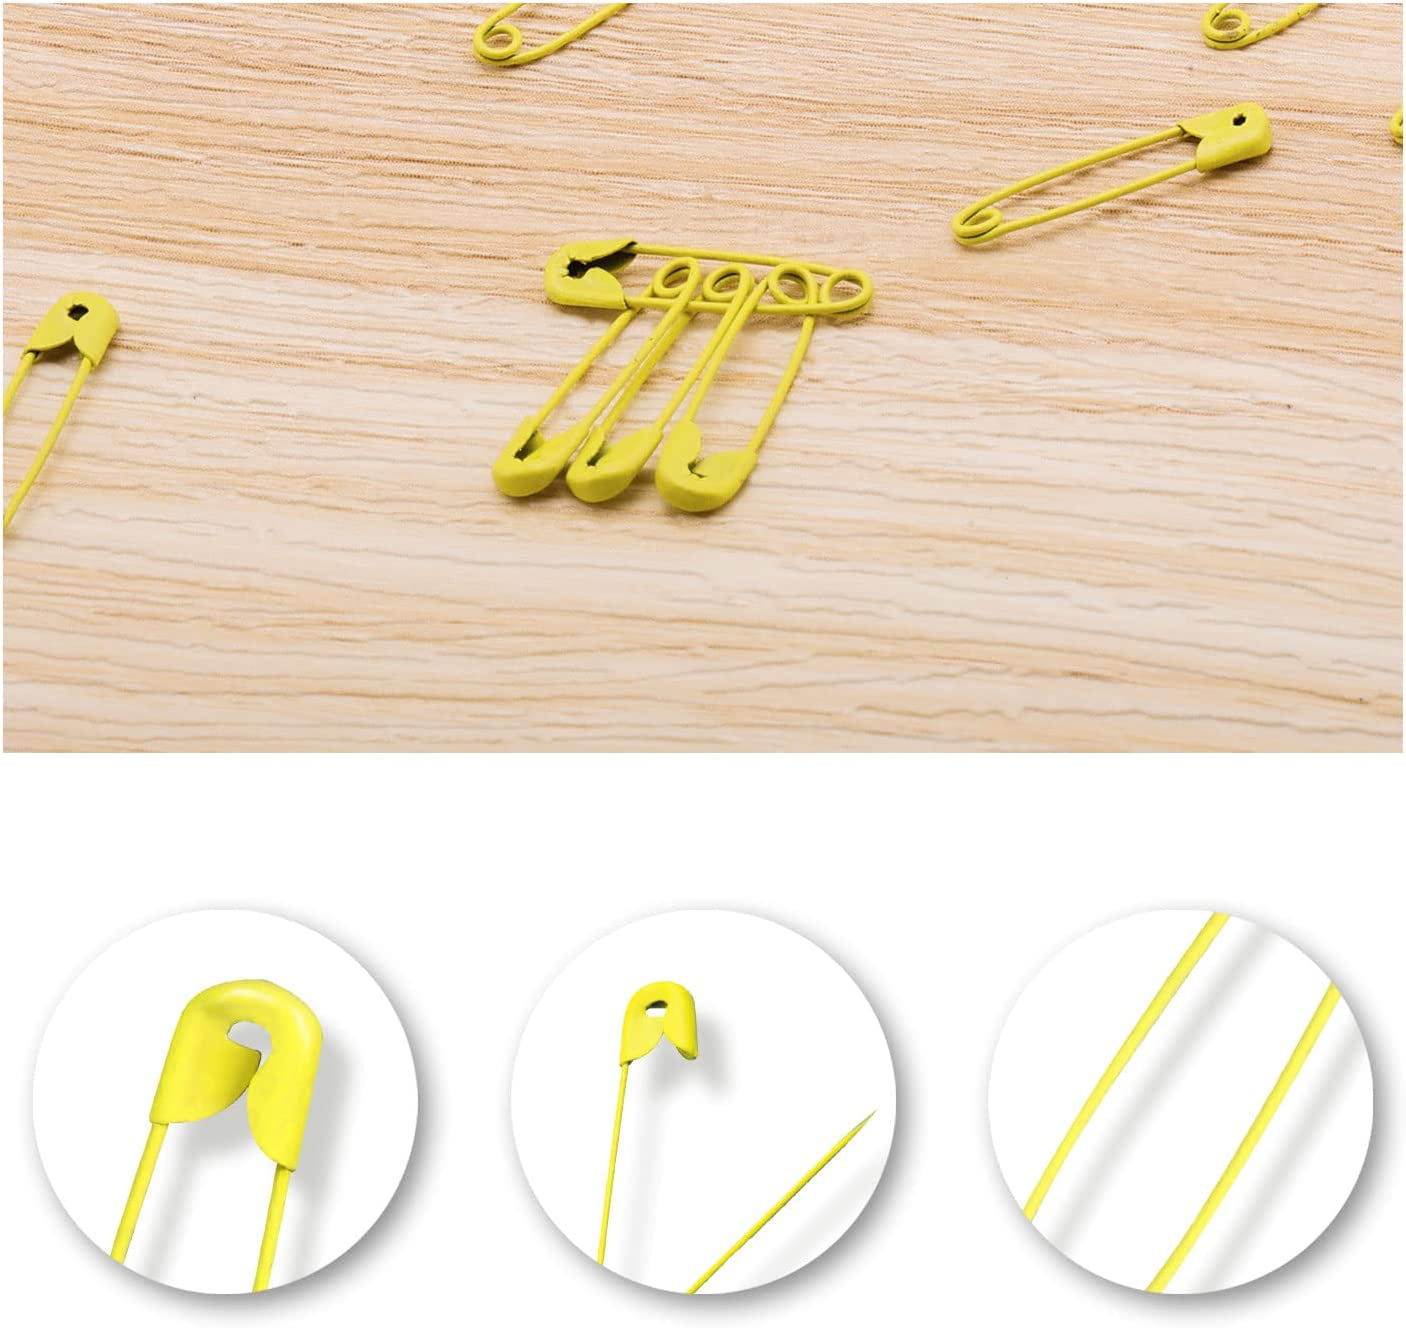 Yellow Safety Pins,Small Safety Pins for Clothes,19mm Metal Mini Saftey Pin for Tag Art Crafting Sewing Jewelry Making (120Pcs/Box)